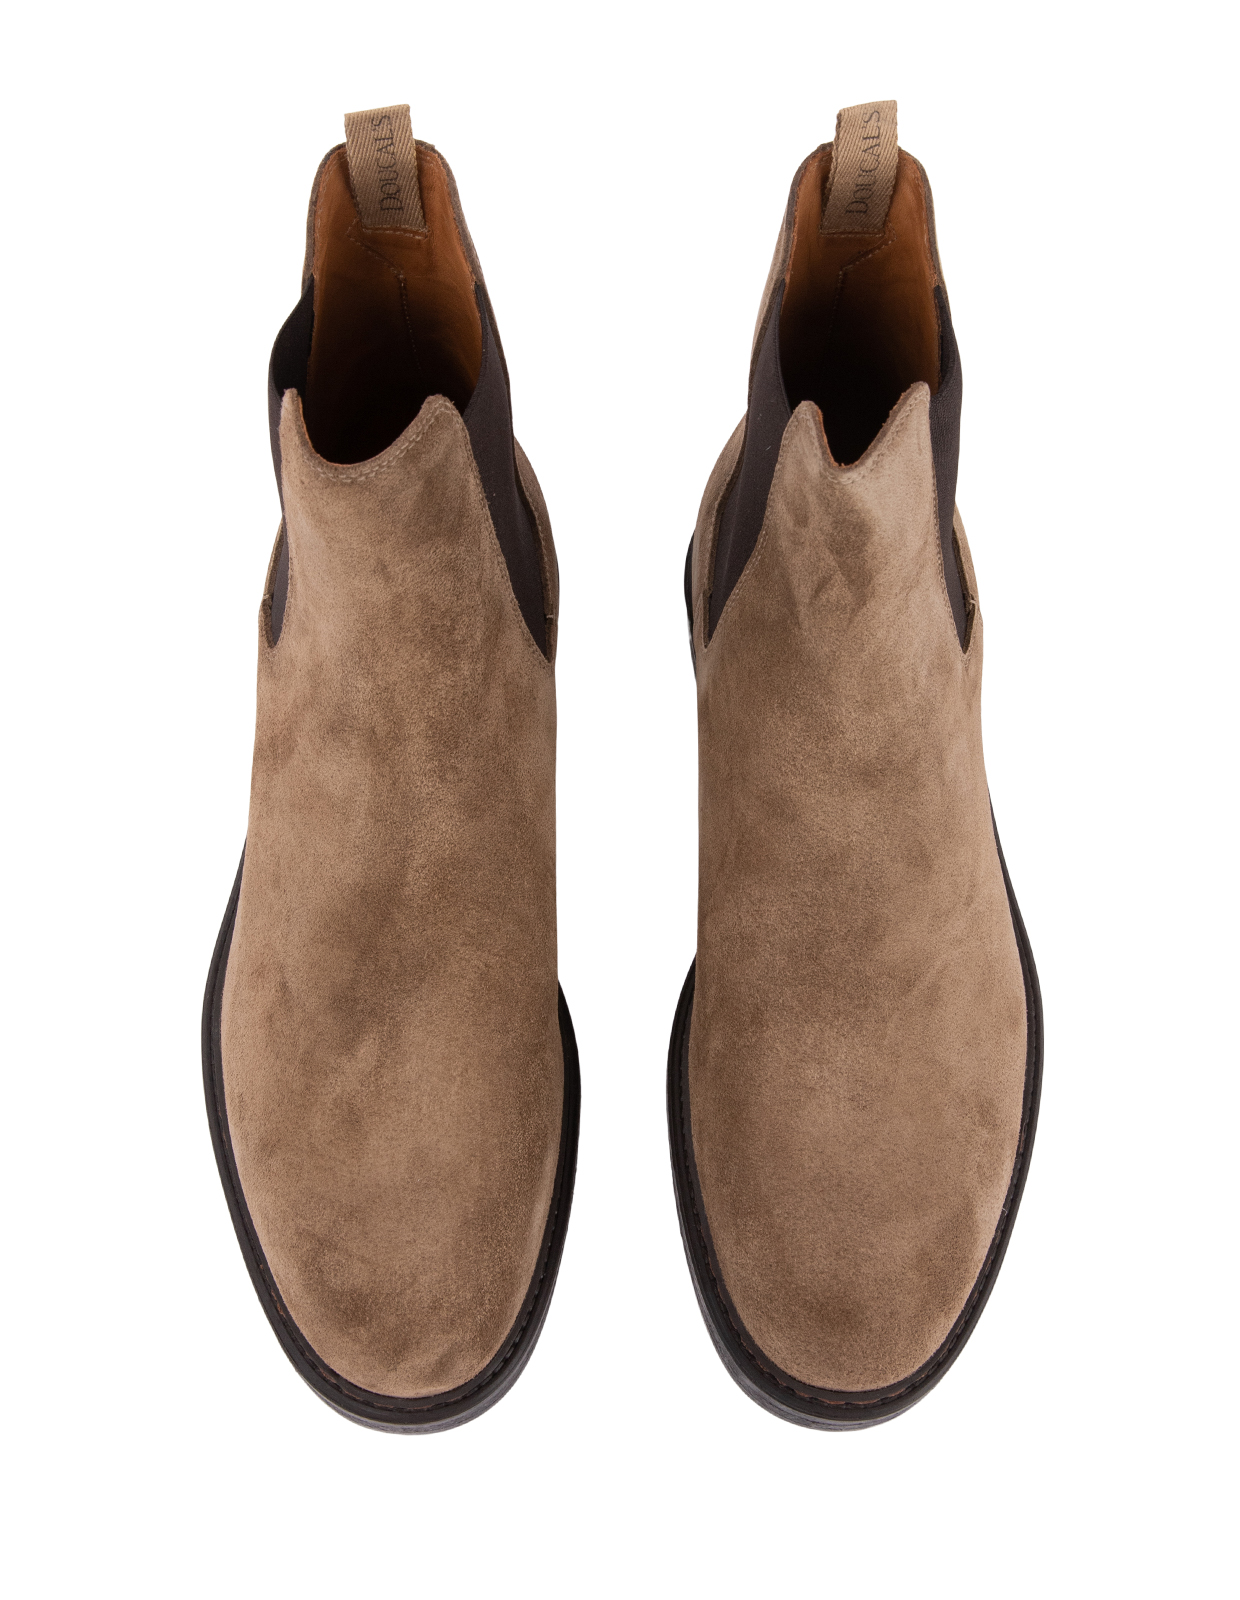 Chelsea Boots Tabacco Stl 44.5